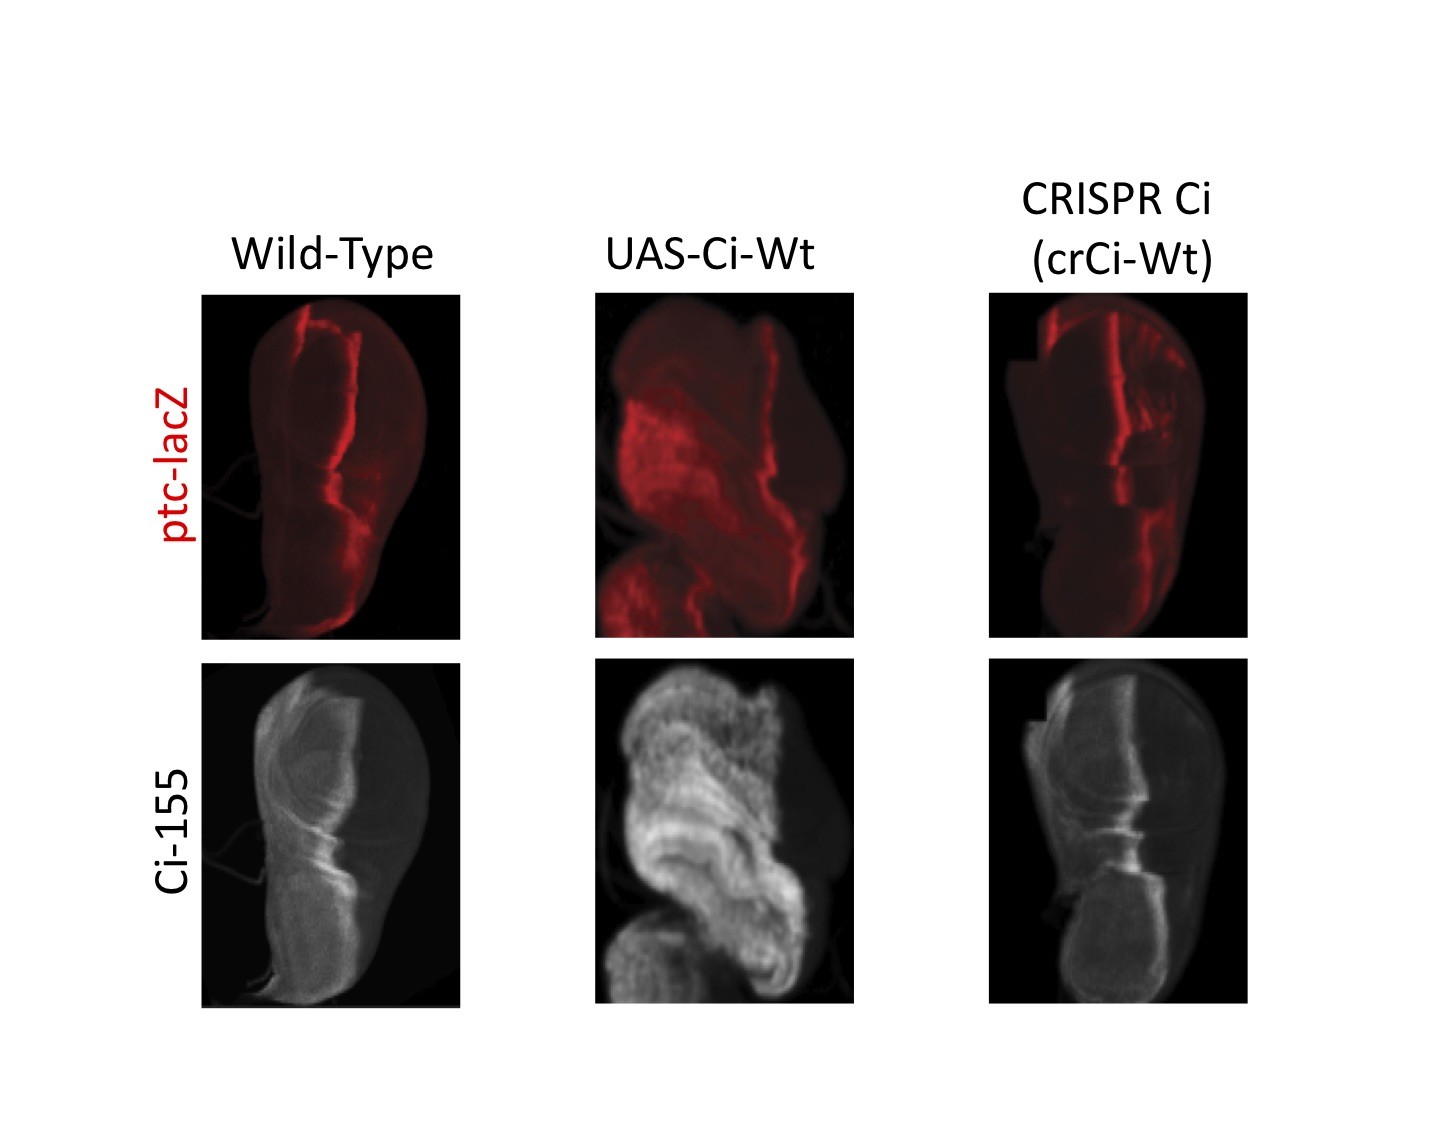 The wild type wing disc with no genetic alteration (left), wing disc where Ci is expressed using UAS system (middle), and wing disc where Ci is expressed using CRISPR/Cas9 (right) are shown here. It is clear that with UAS, Ci (grey) is over expressed and the overall shape of the wing disc is expanded compared to the wild type. CRISPR Ci looks and behaves like the Wt disc.